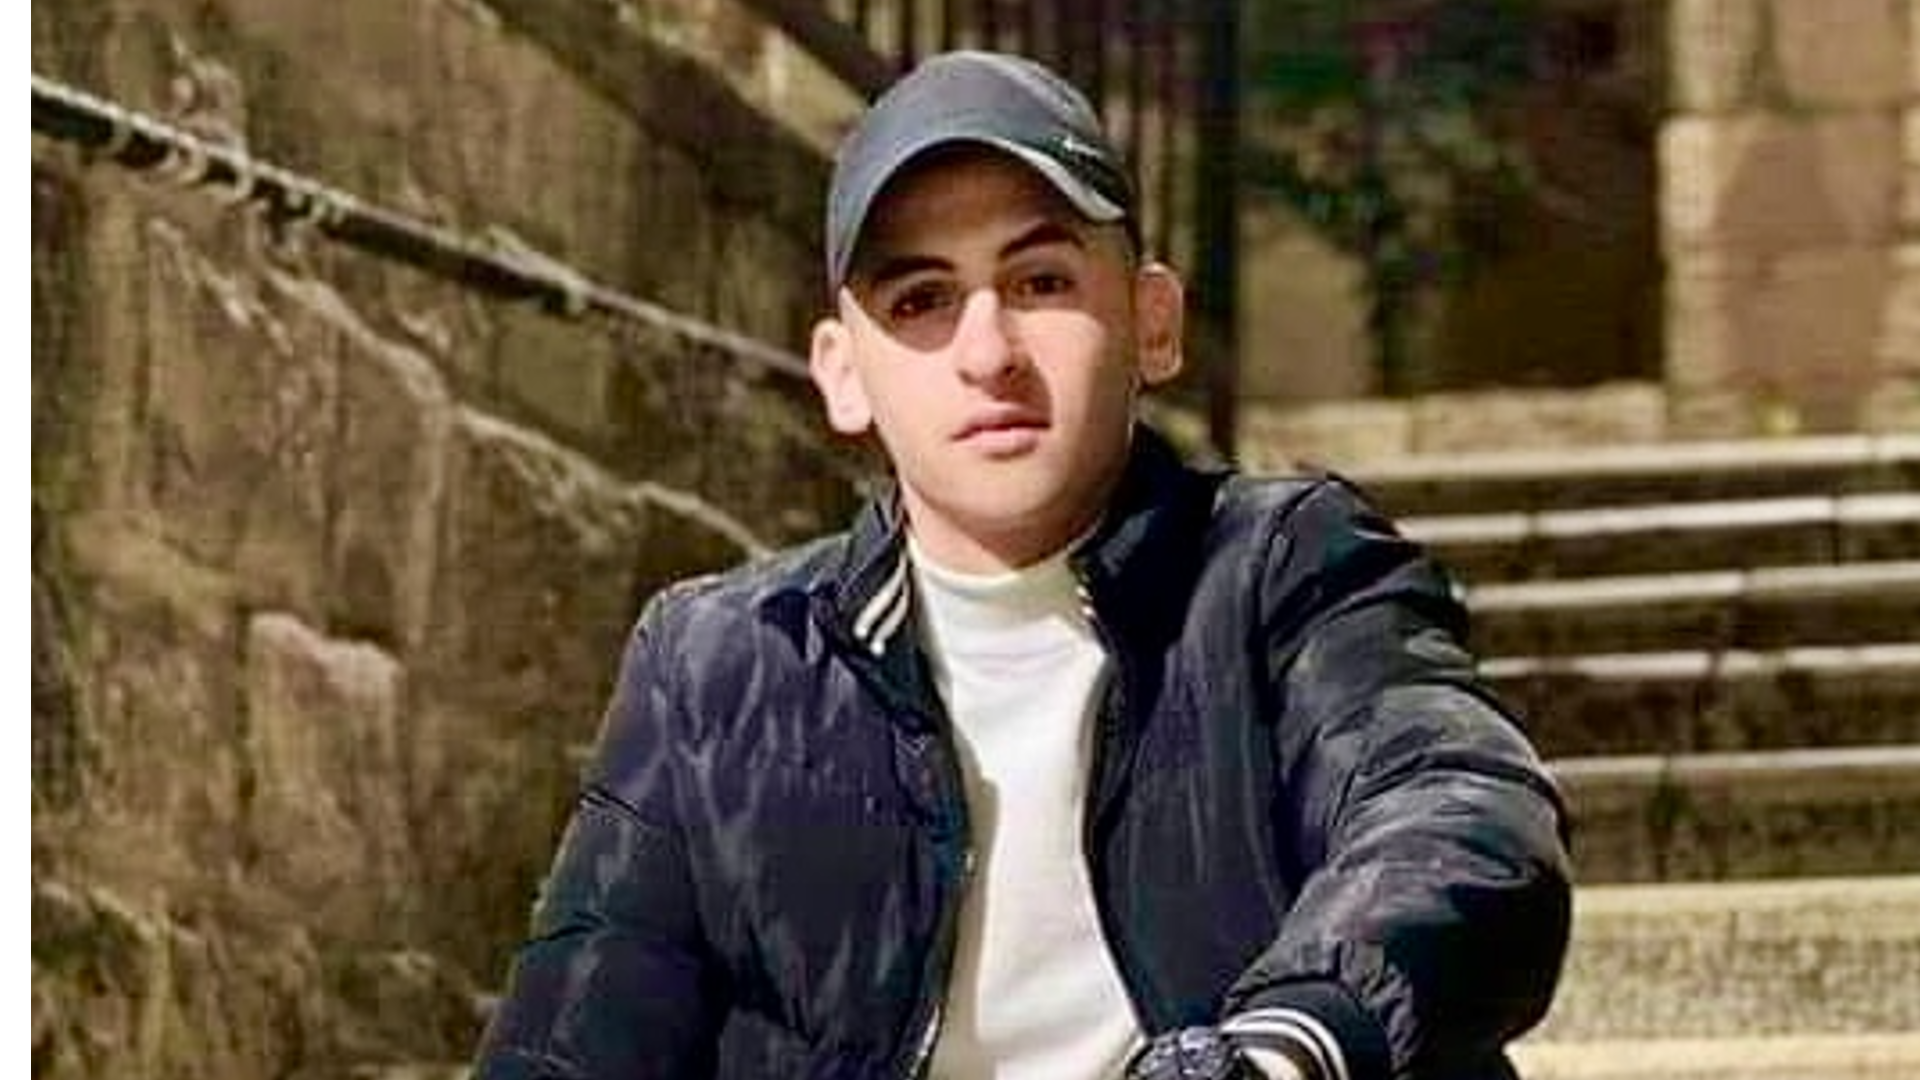 Bader al-Masri, 19, succumbed to his wounds after being shot by Israeli forces in the occupied West Bank city of Nablus on 20 July 2023 (Screengrab)